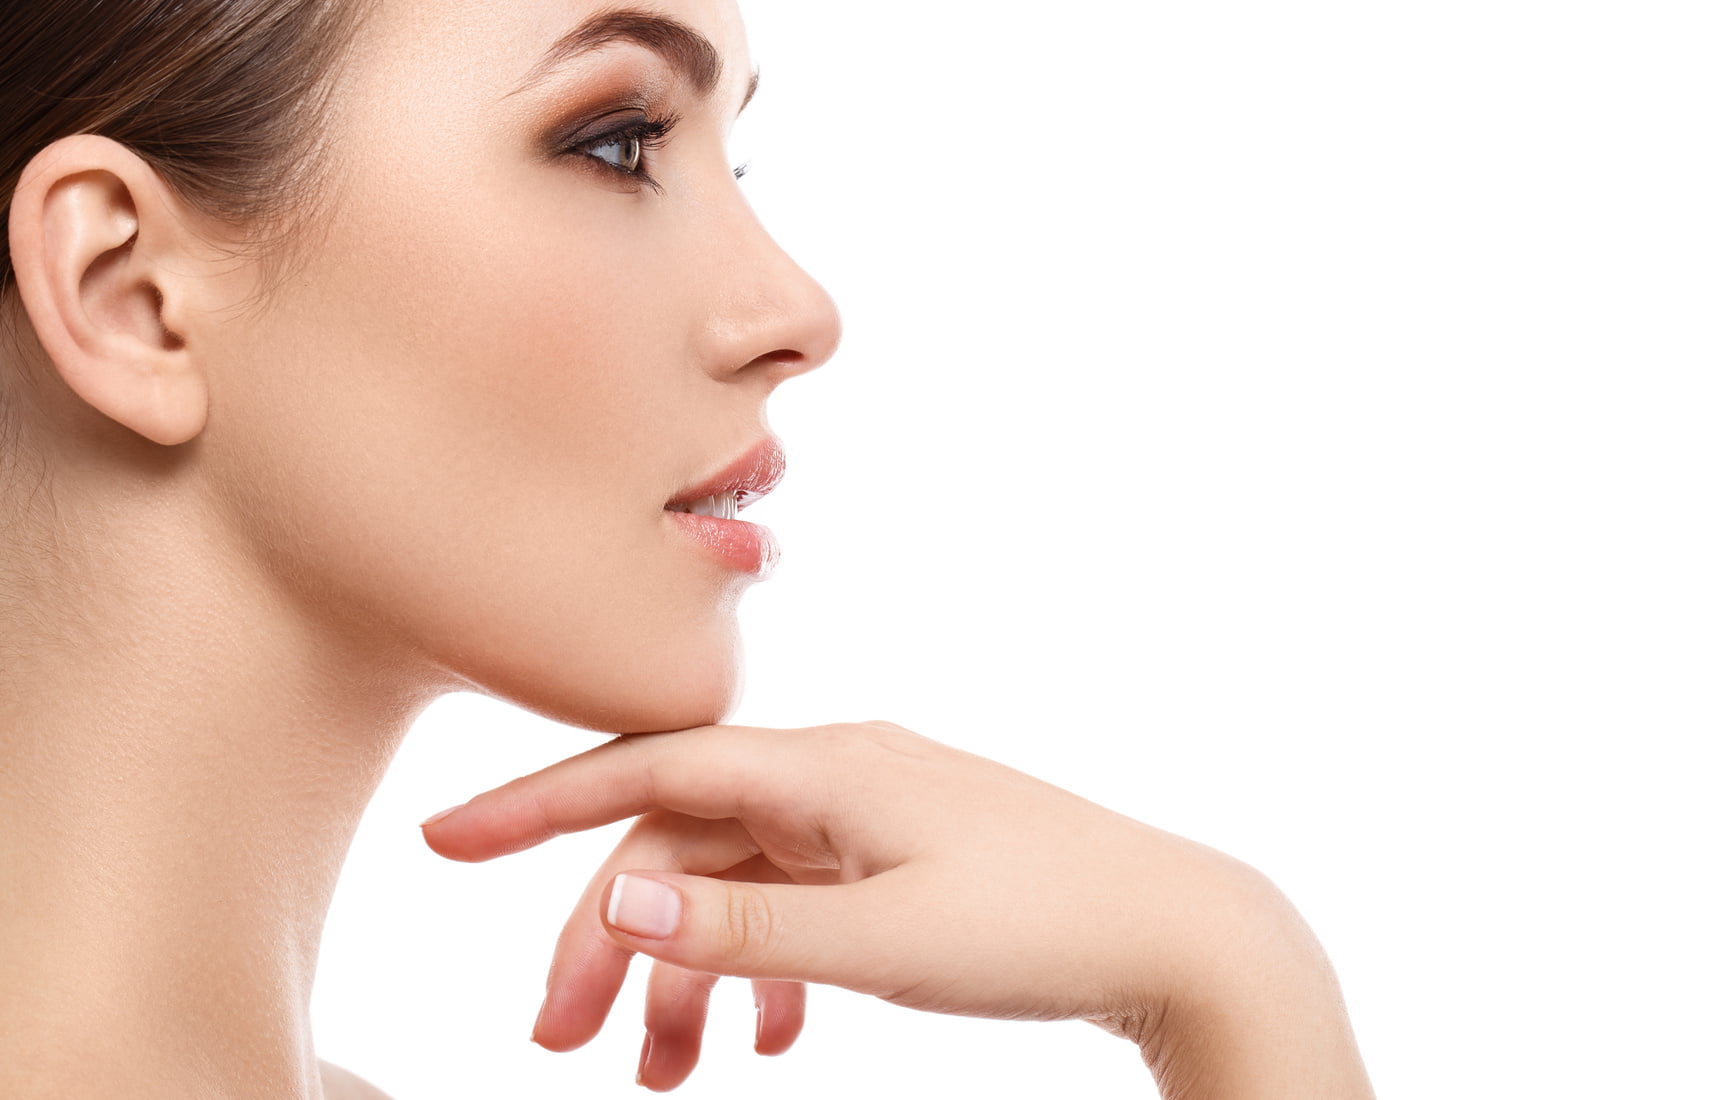 Jaw Reduction: Achieving a More Balanced Facial Profile